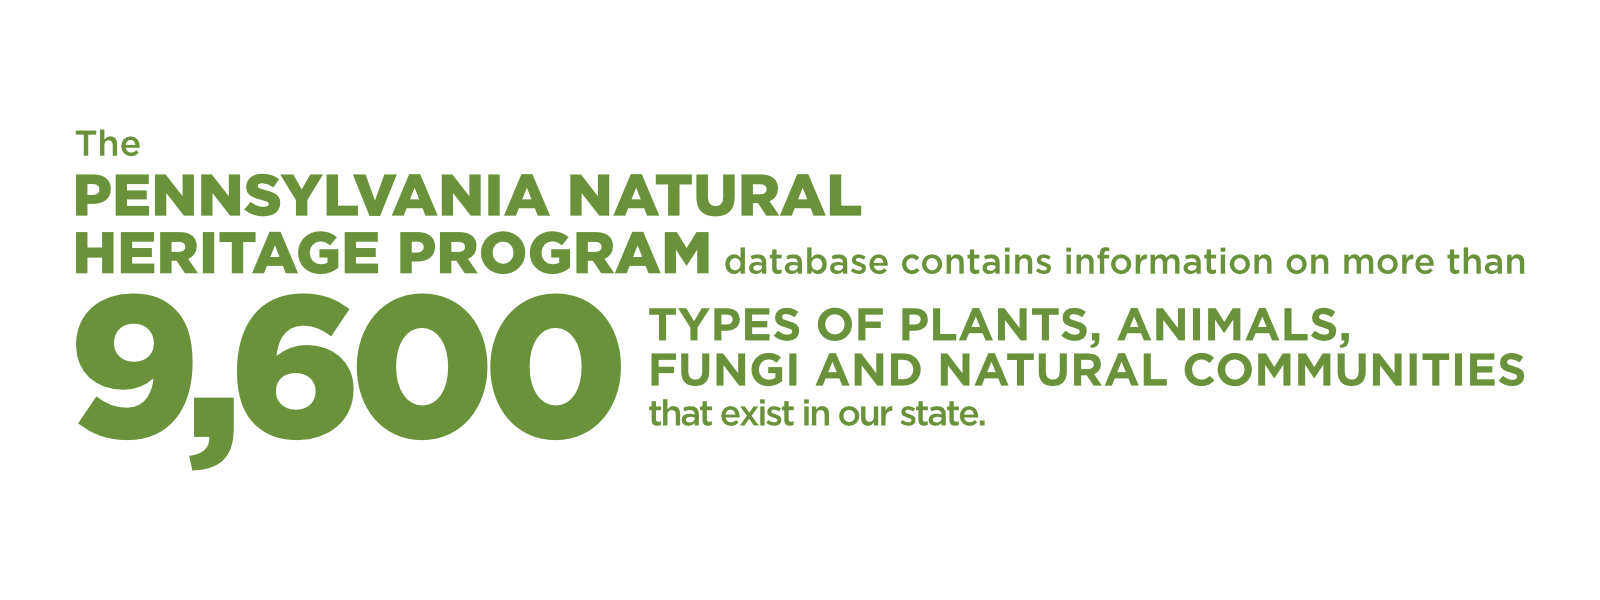 Text Infographic that reads "The Pennsylvania Natural Heritage Program database contains information on more than 9,600 types of plants, animals, fungi and natural communities that exist in our state."